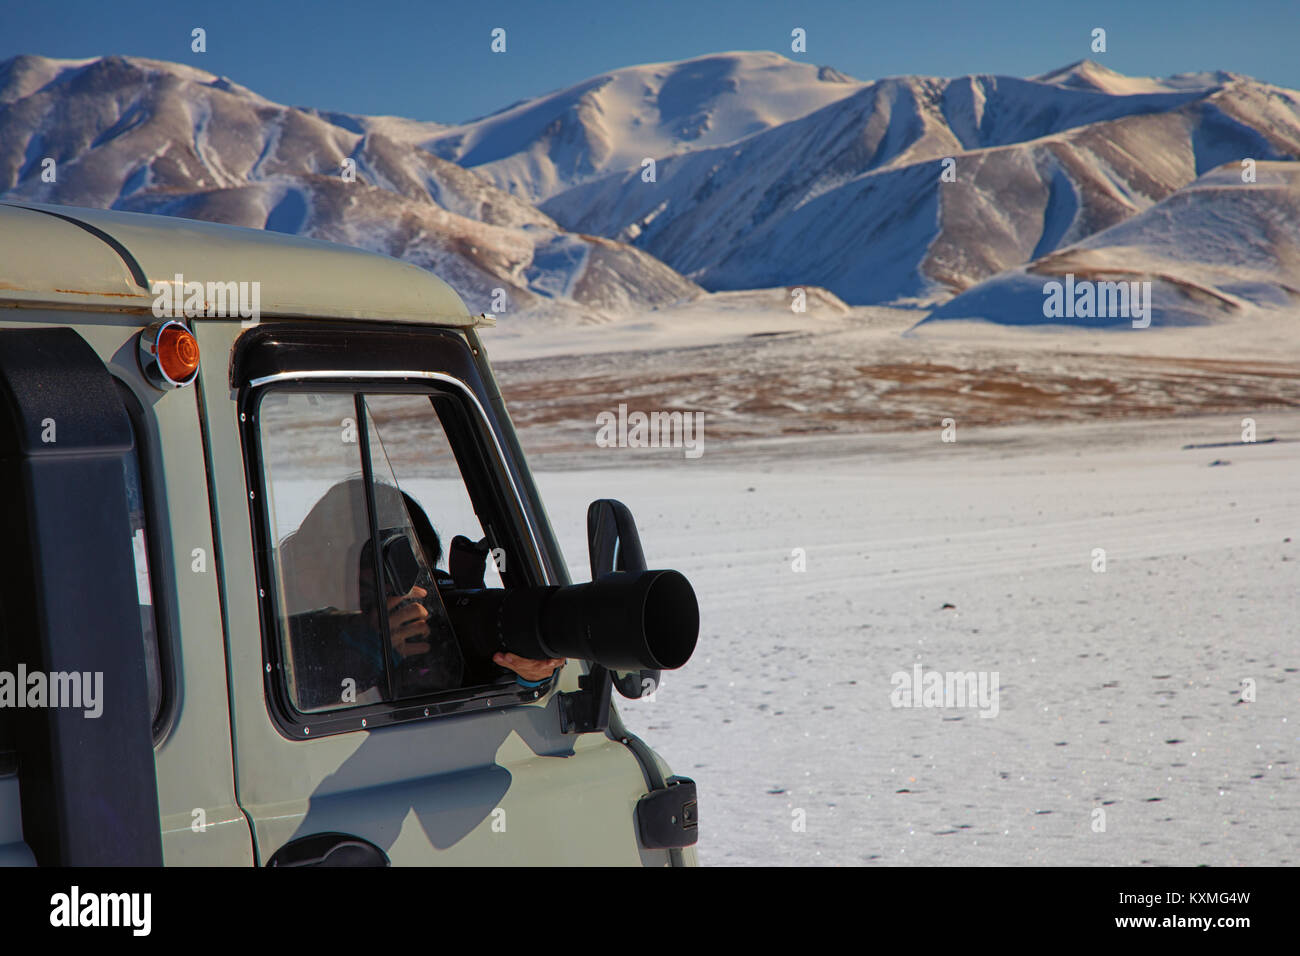 Girl taking pictures russian van UAZ 452 camper dslr zoom lengs sigma 150-600mm snow winter Mongolia snowy mountains golden hour Stock Photo